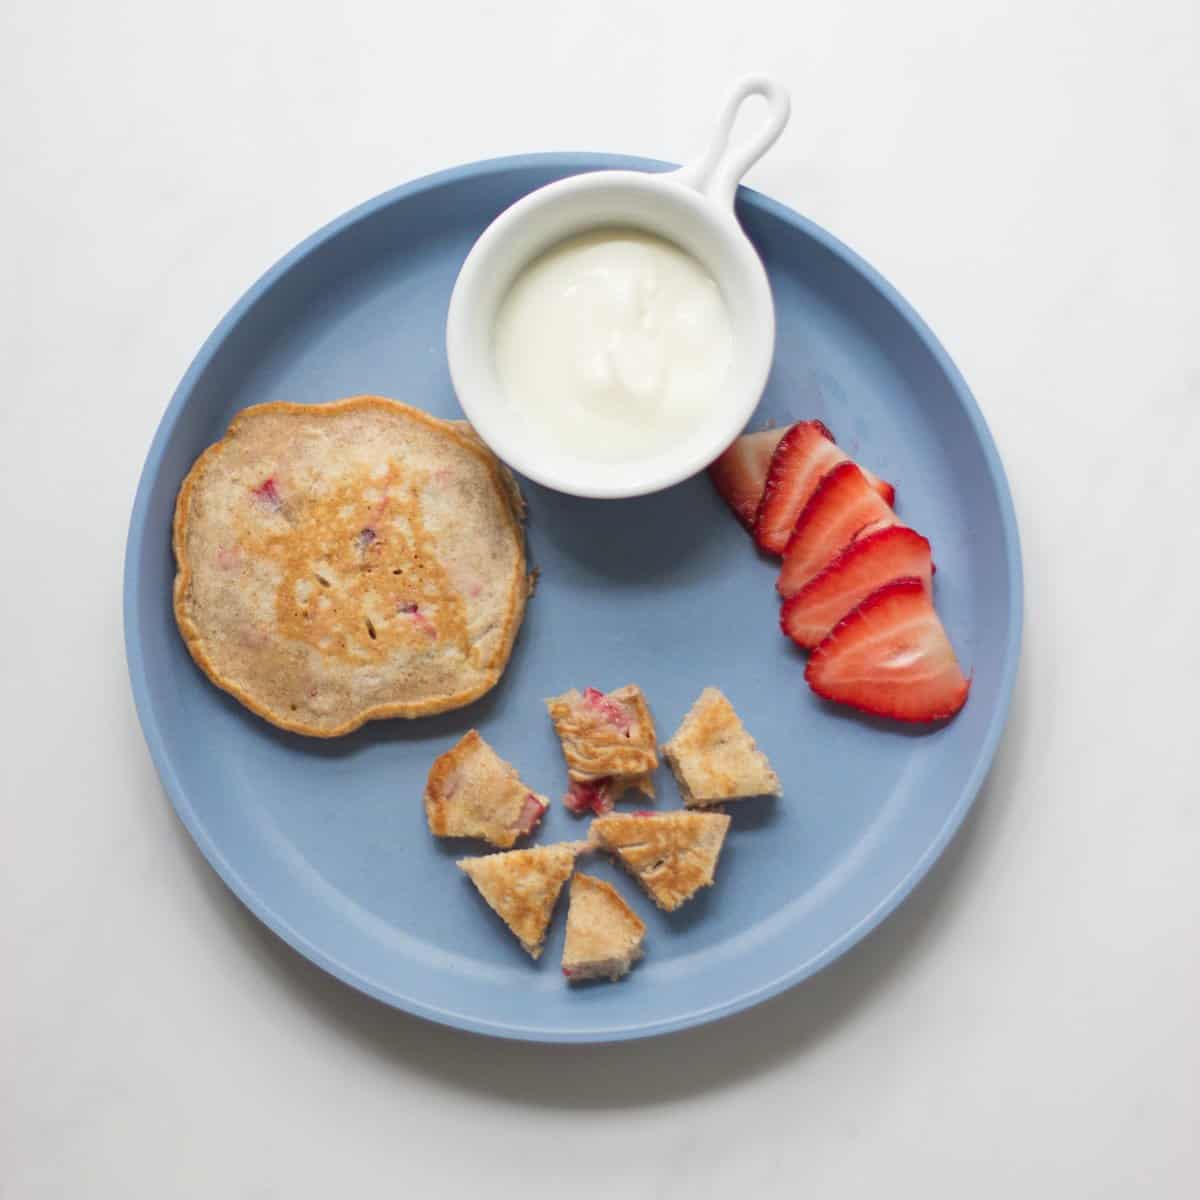 A toddler's breakfast plate with pancakes, yogurt, and fresh strawberries.